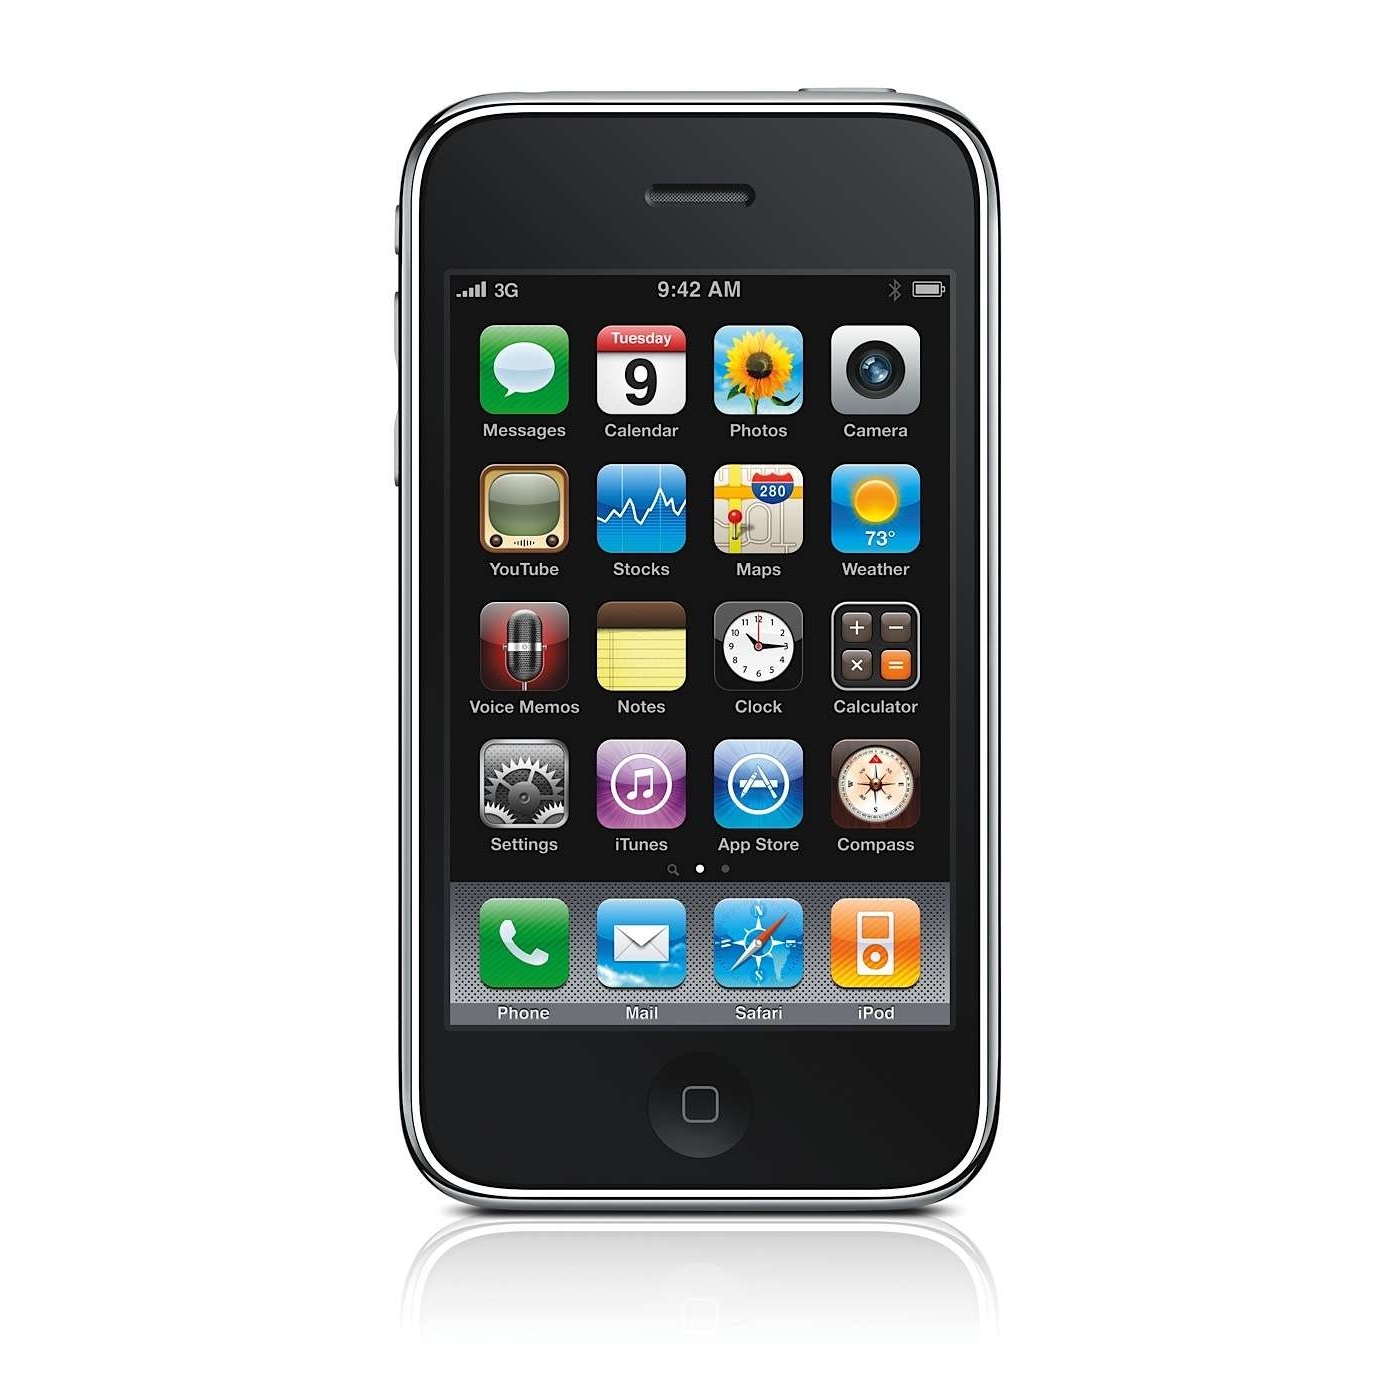 Preview Iphone 3gs - HD Wallpaper 